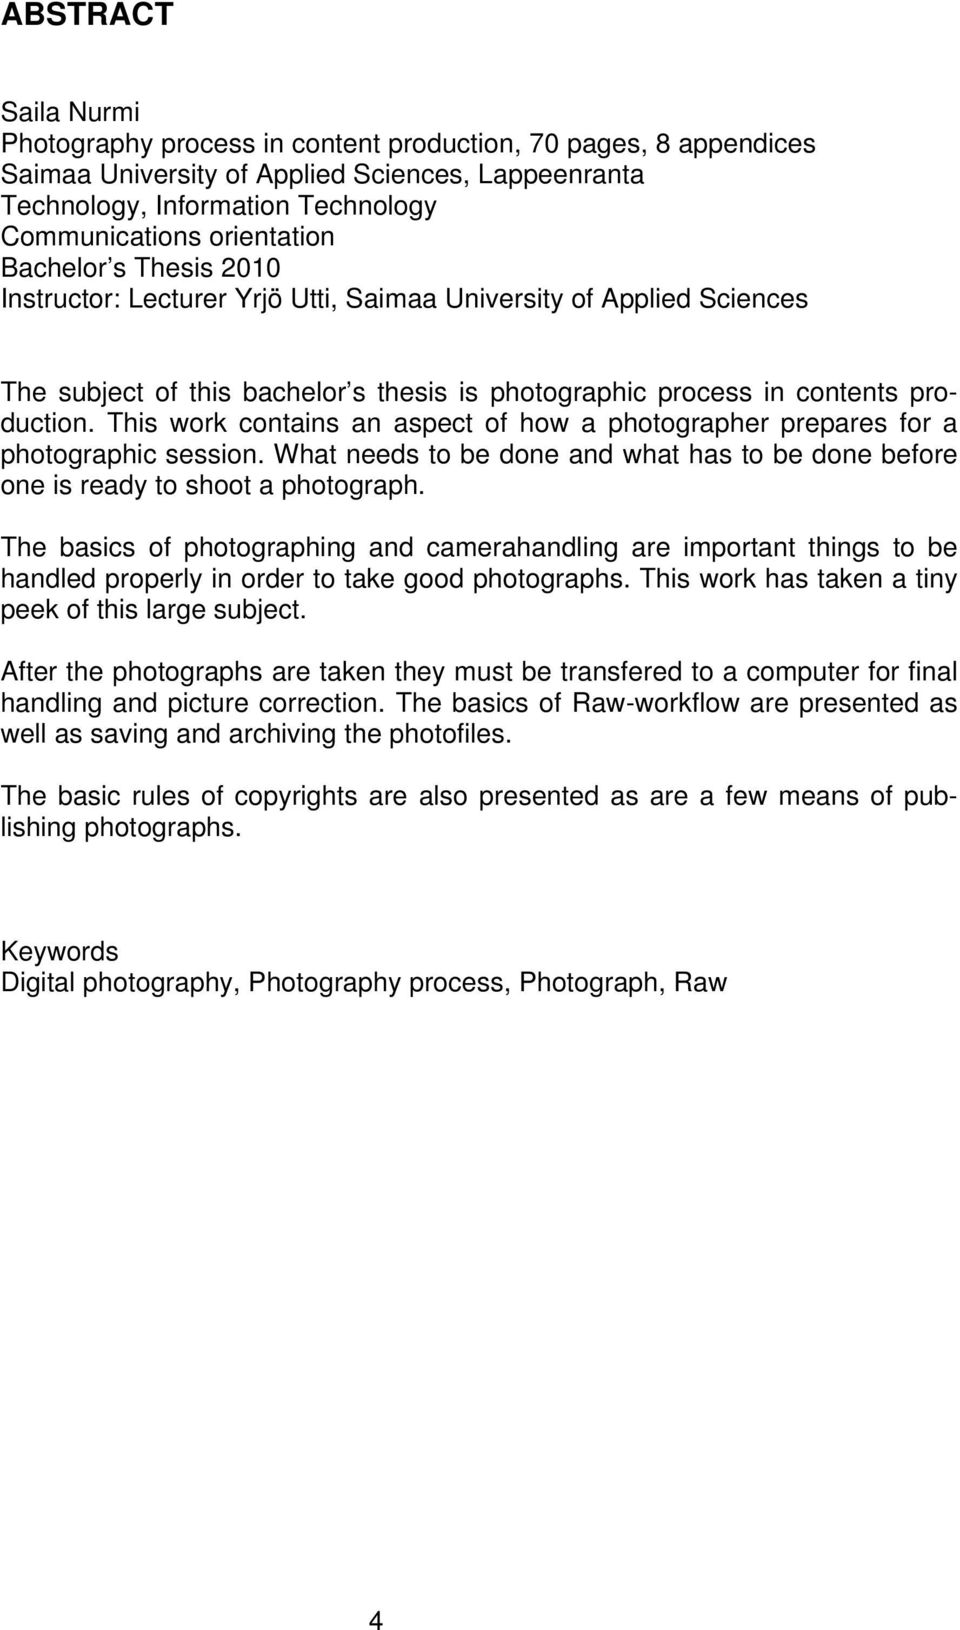 This work contains an aspect of how a photographer prepares for a photographic session. What needs to be done and what has to be done before one is ready to shoot a photograph.